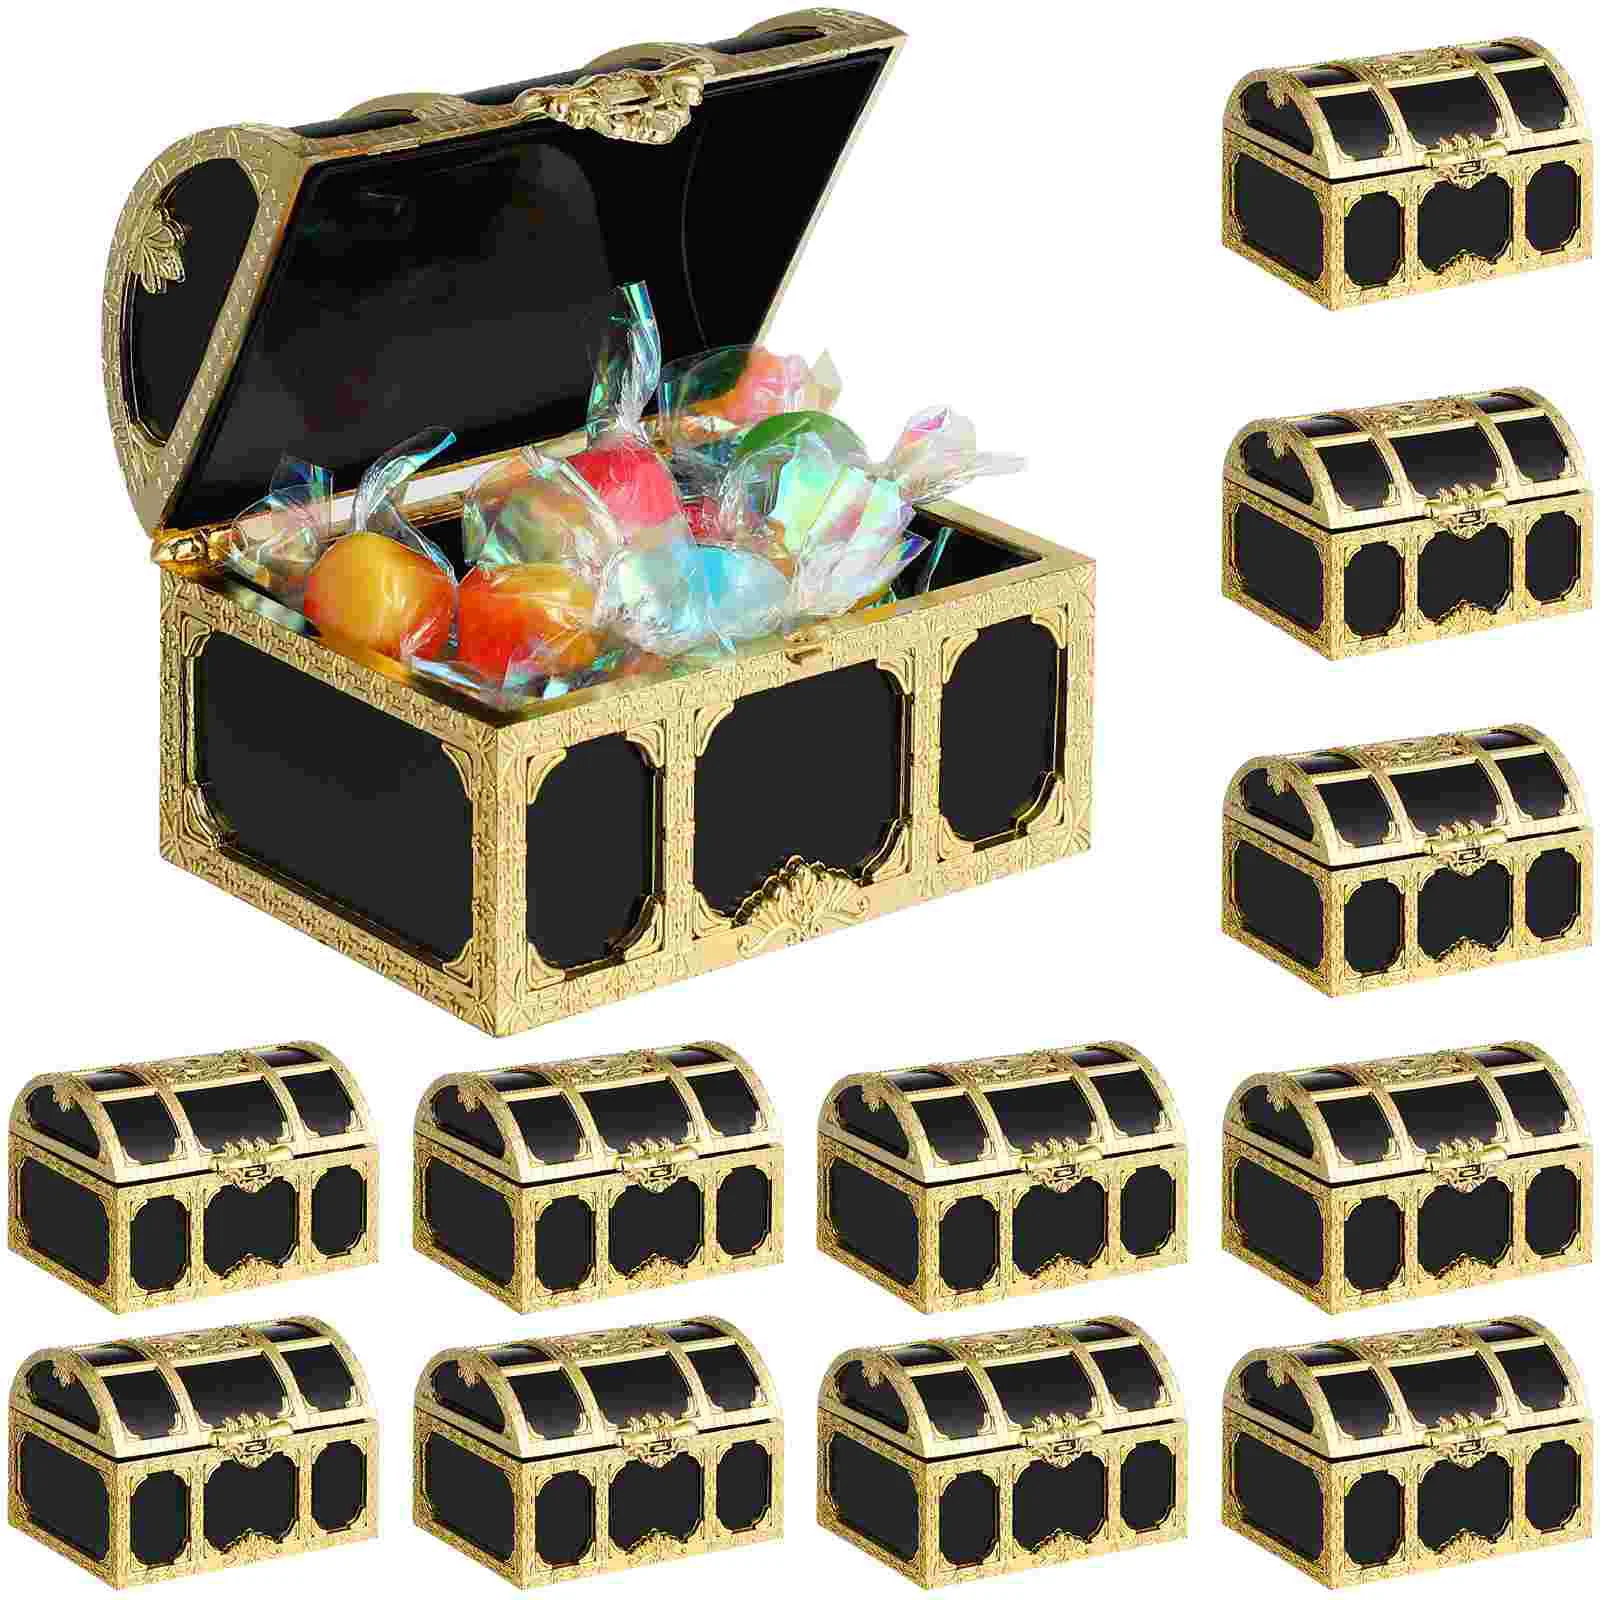 

12 Pcs Treasure Treat Boxes Rayan Toys Kids Pirate Candy Boxes Treasure Favor Box Pirate Goodie Boxes Kids Playsets